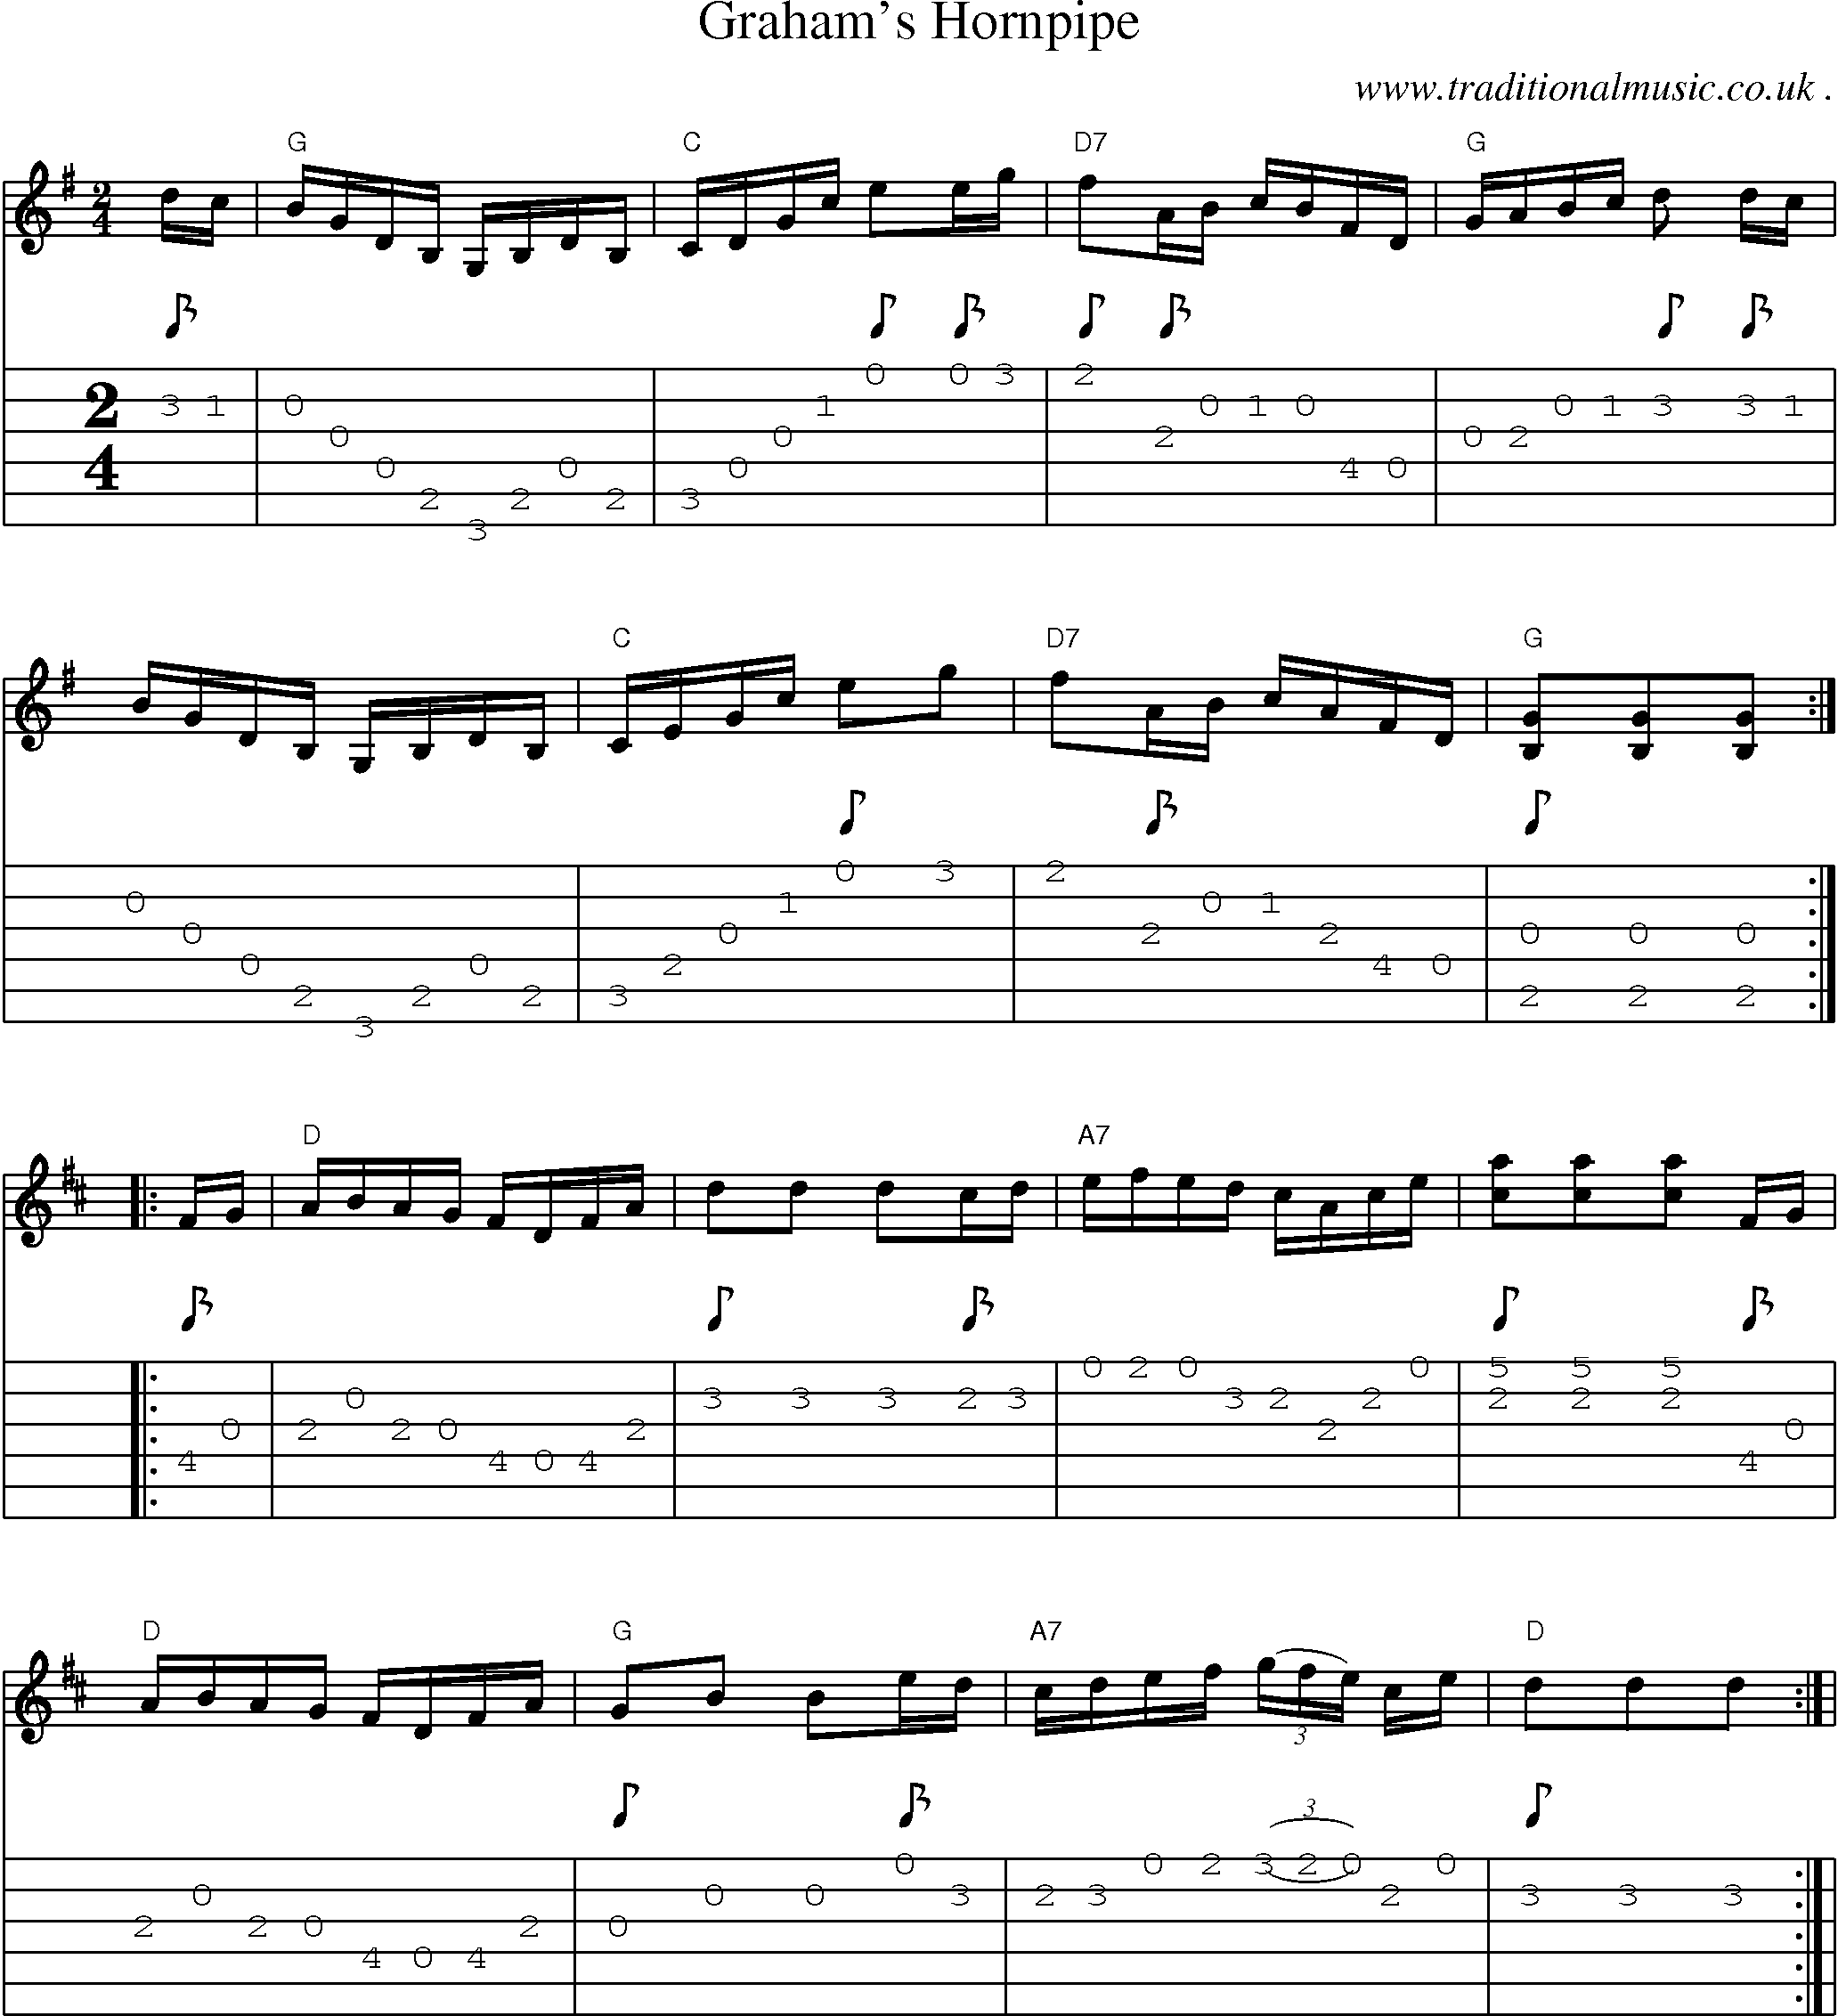 Sheet-Music and Guitar Tabs for Grahams Hornpipe